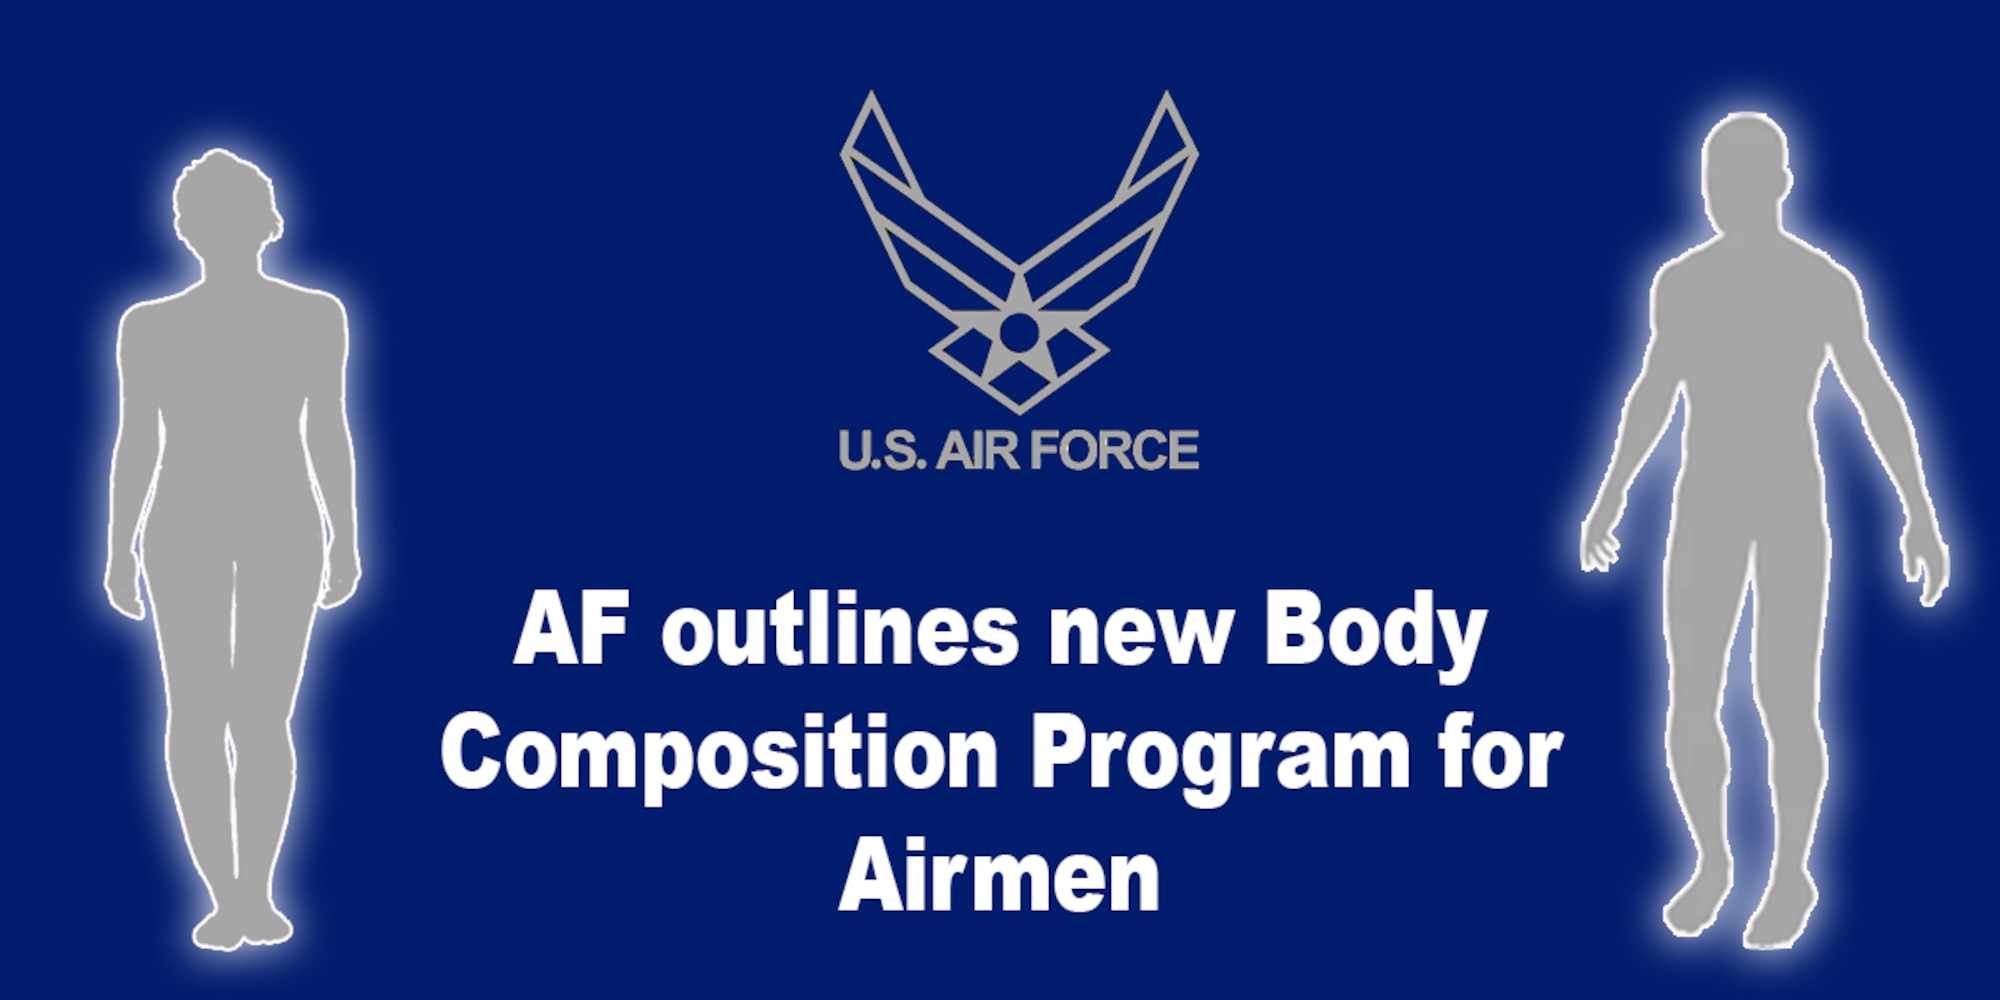 Department of the Air Force outlines new Body Composition Program for